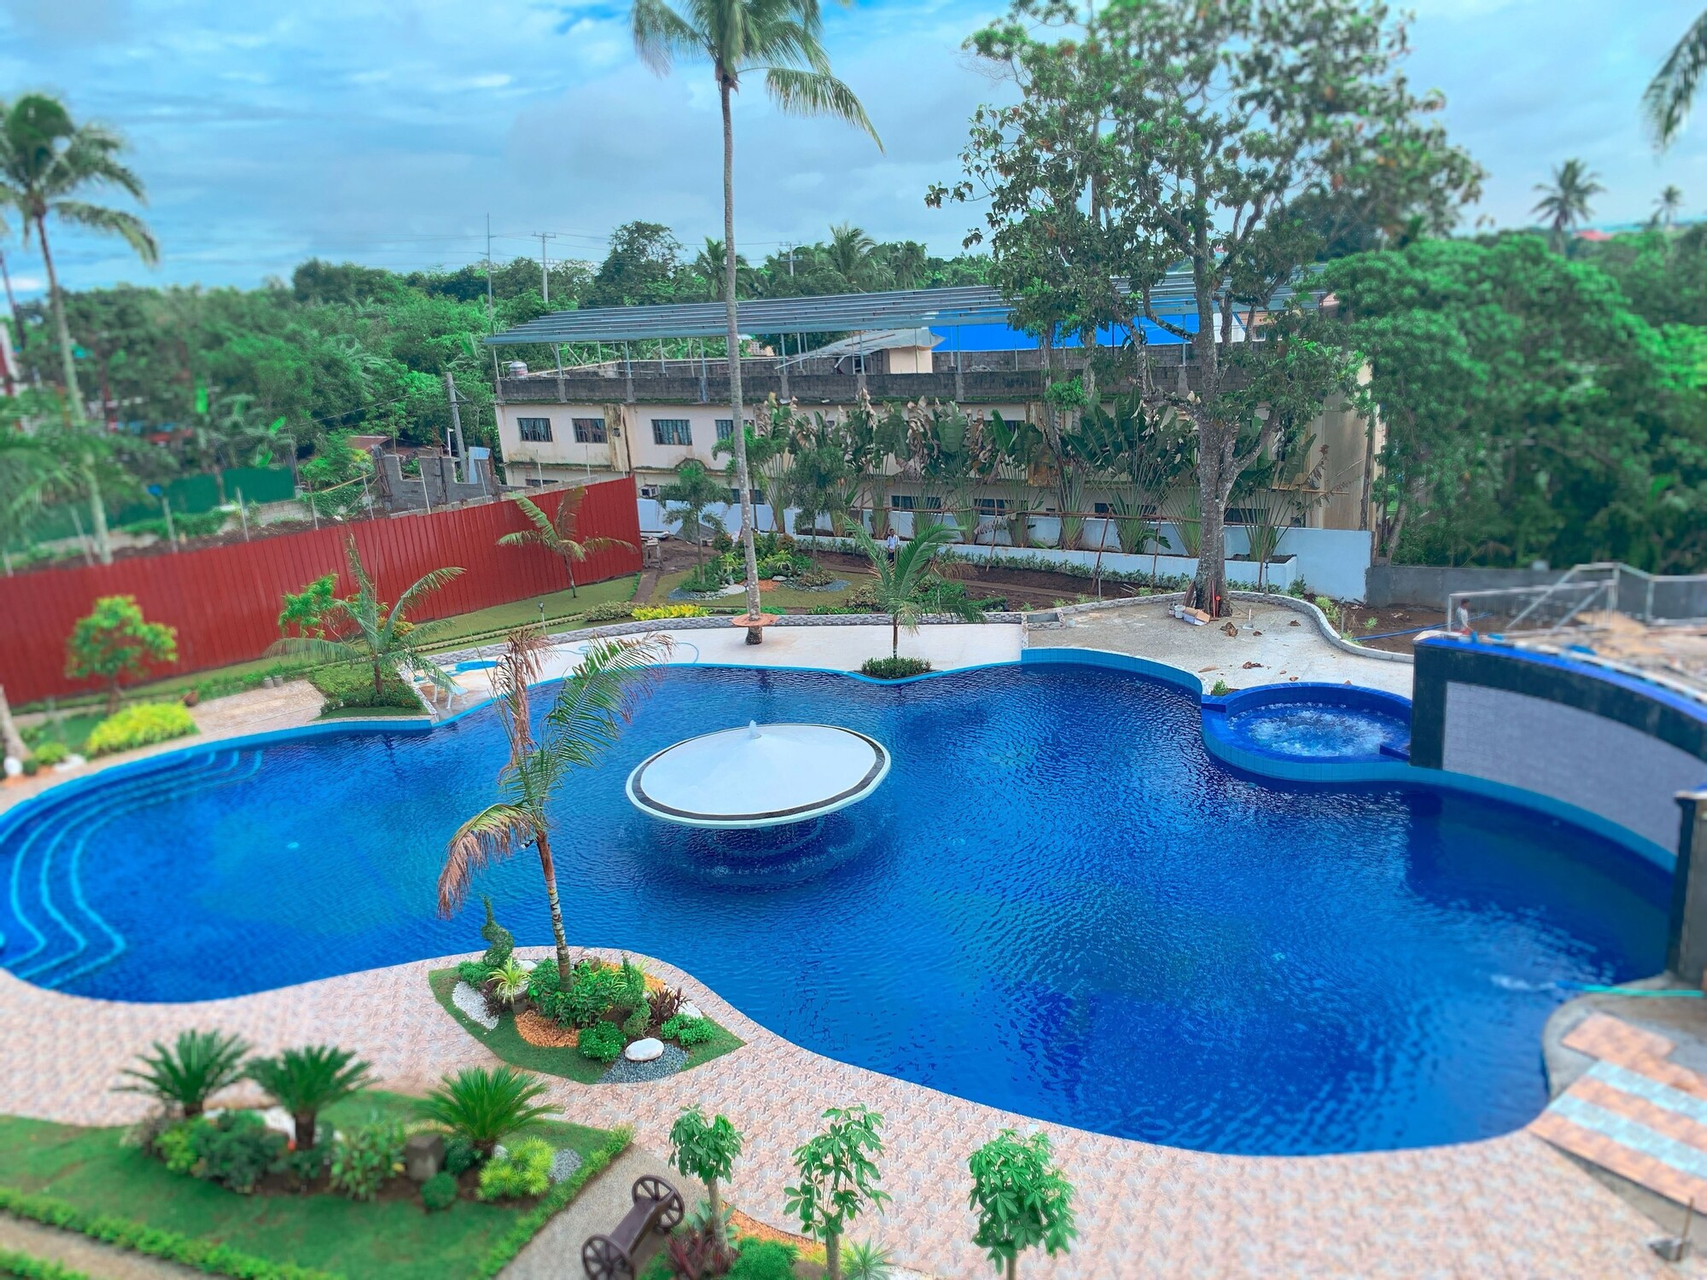 STARVIEW HOTEL AND RESORT, Silang